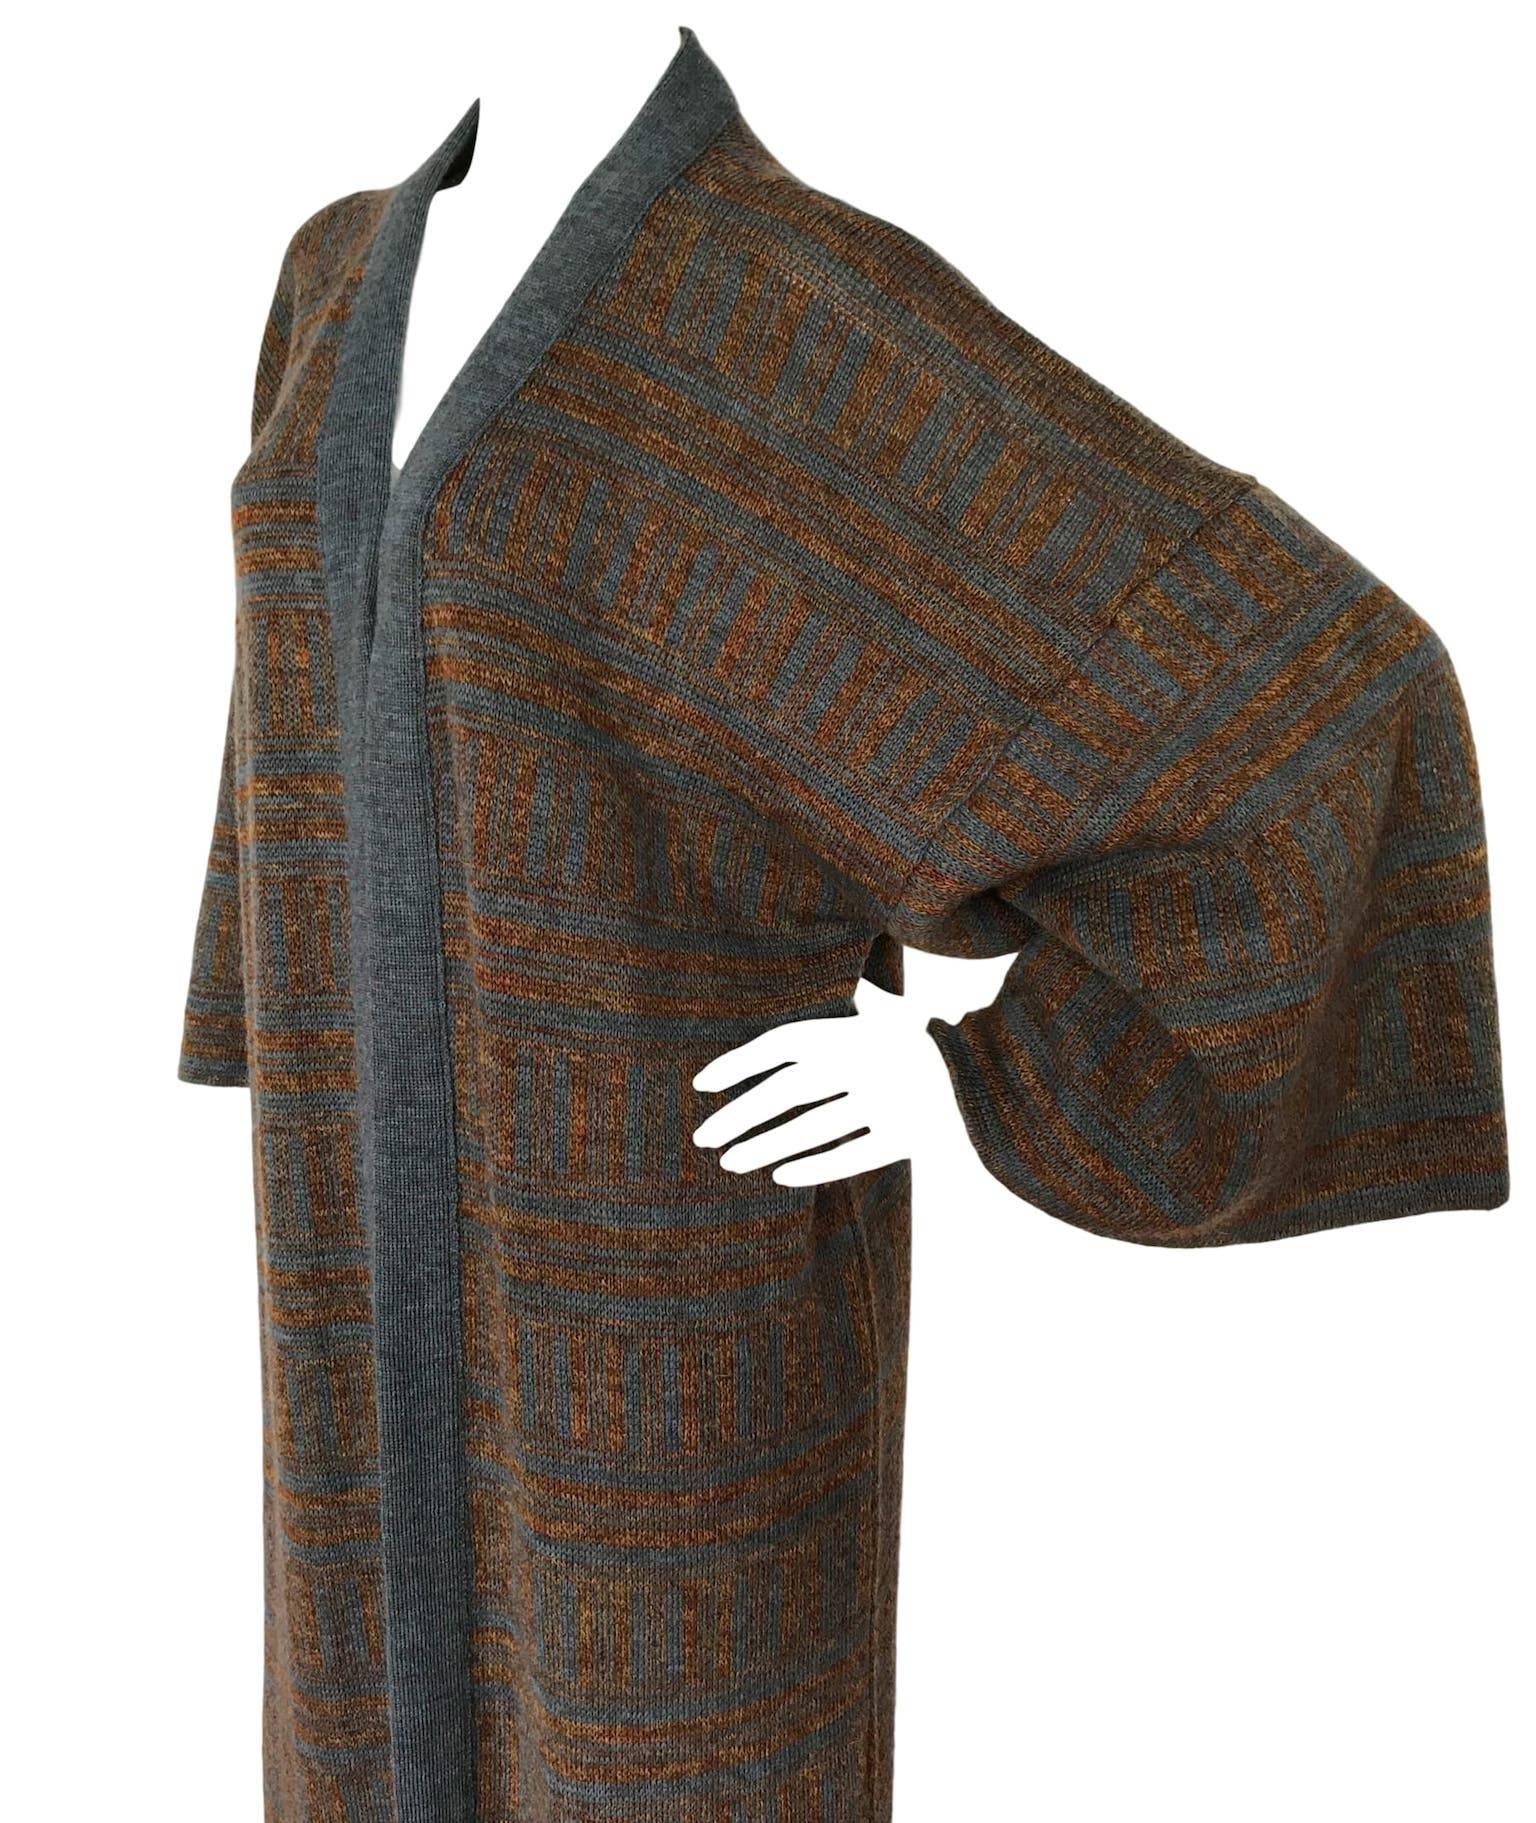 Bill Gibb 1970s knitted coat, made from pure wool and has wide kimono like sleeves. In excellent condition. Free sized up to a UK 12/14 and 42 inches length.